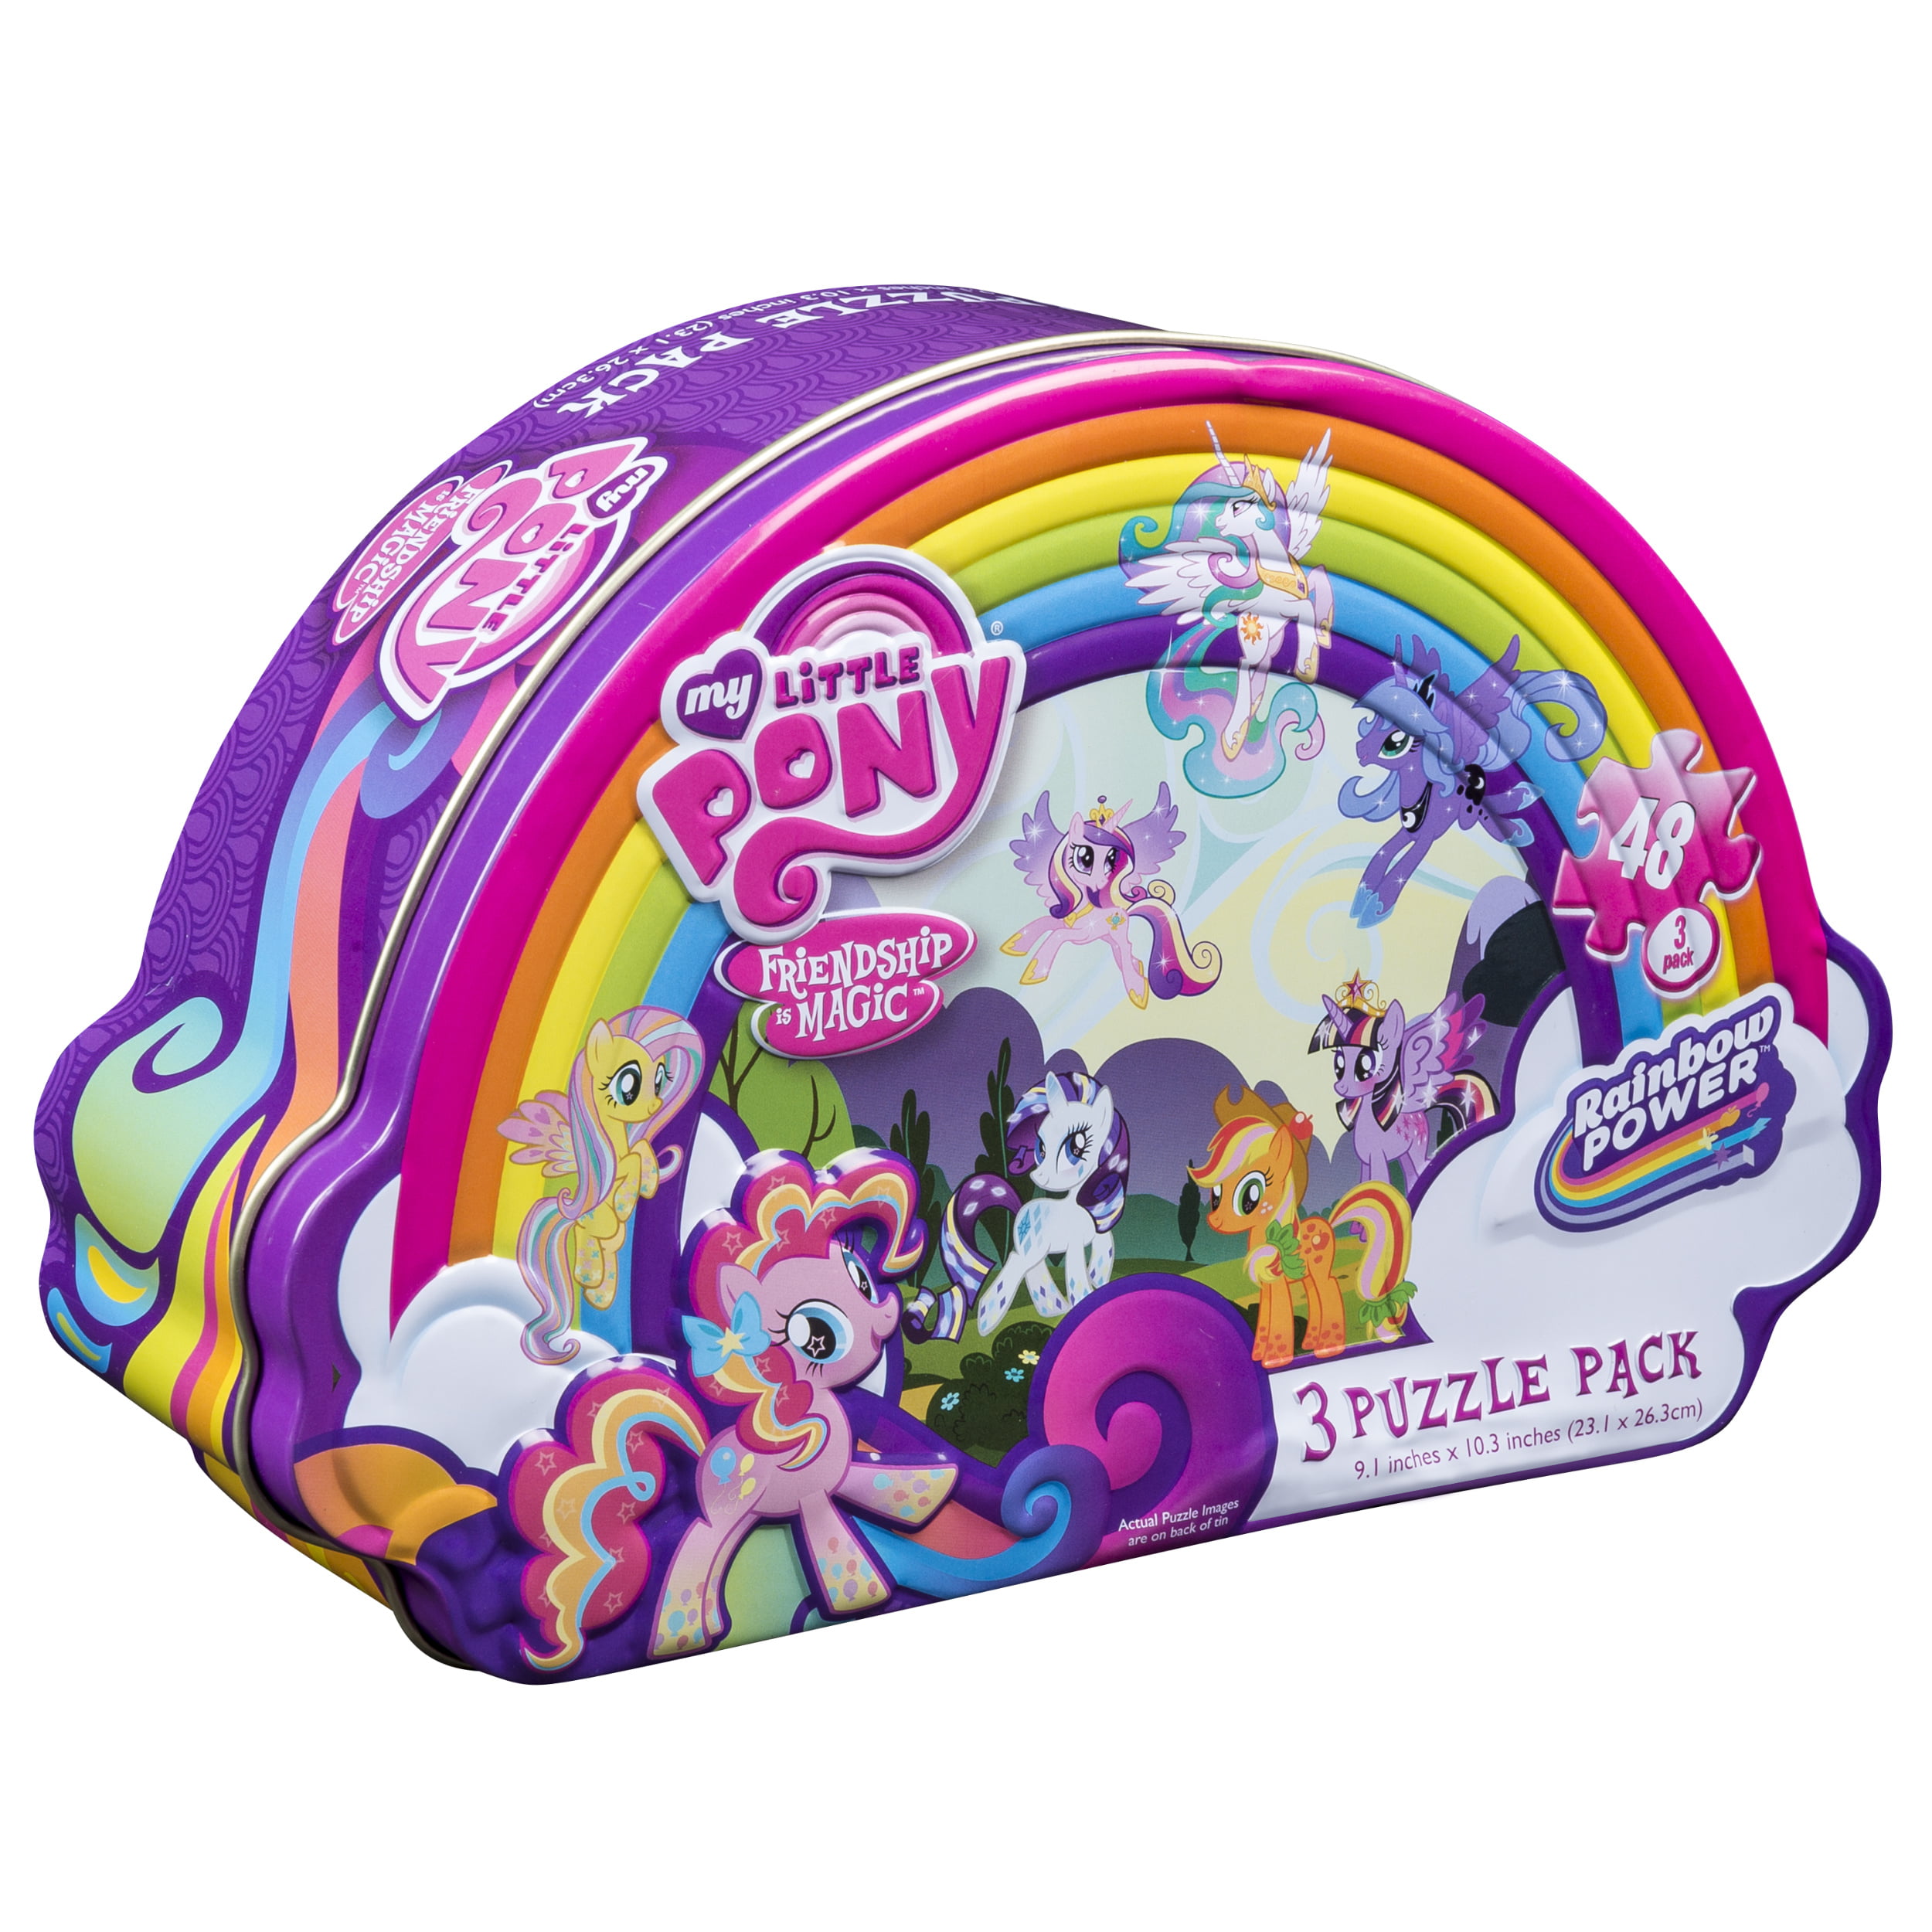 Ravensburger 06896 Colourfull High Quality My Little Pony 4 Jigsaw Puzzle for sale online 